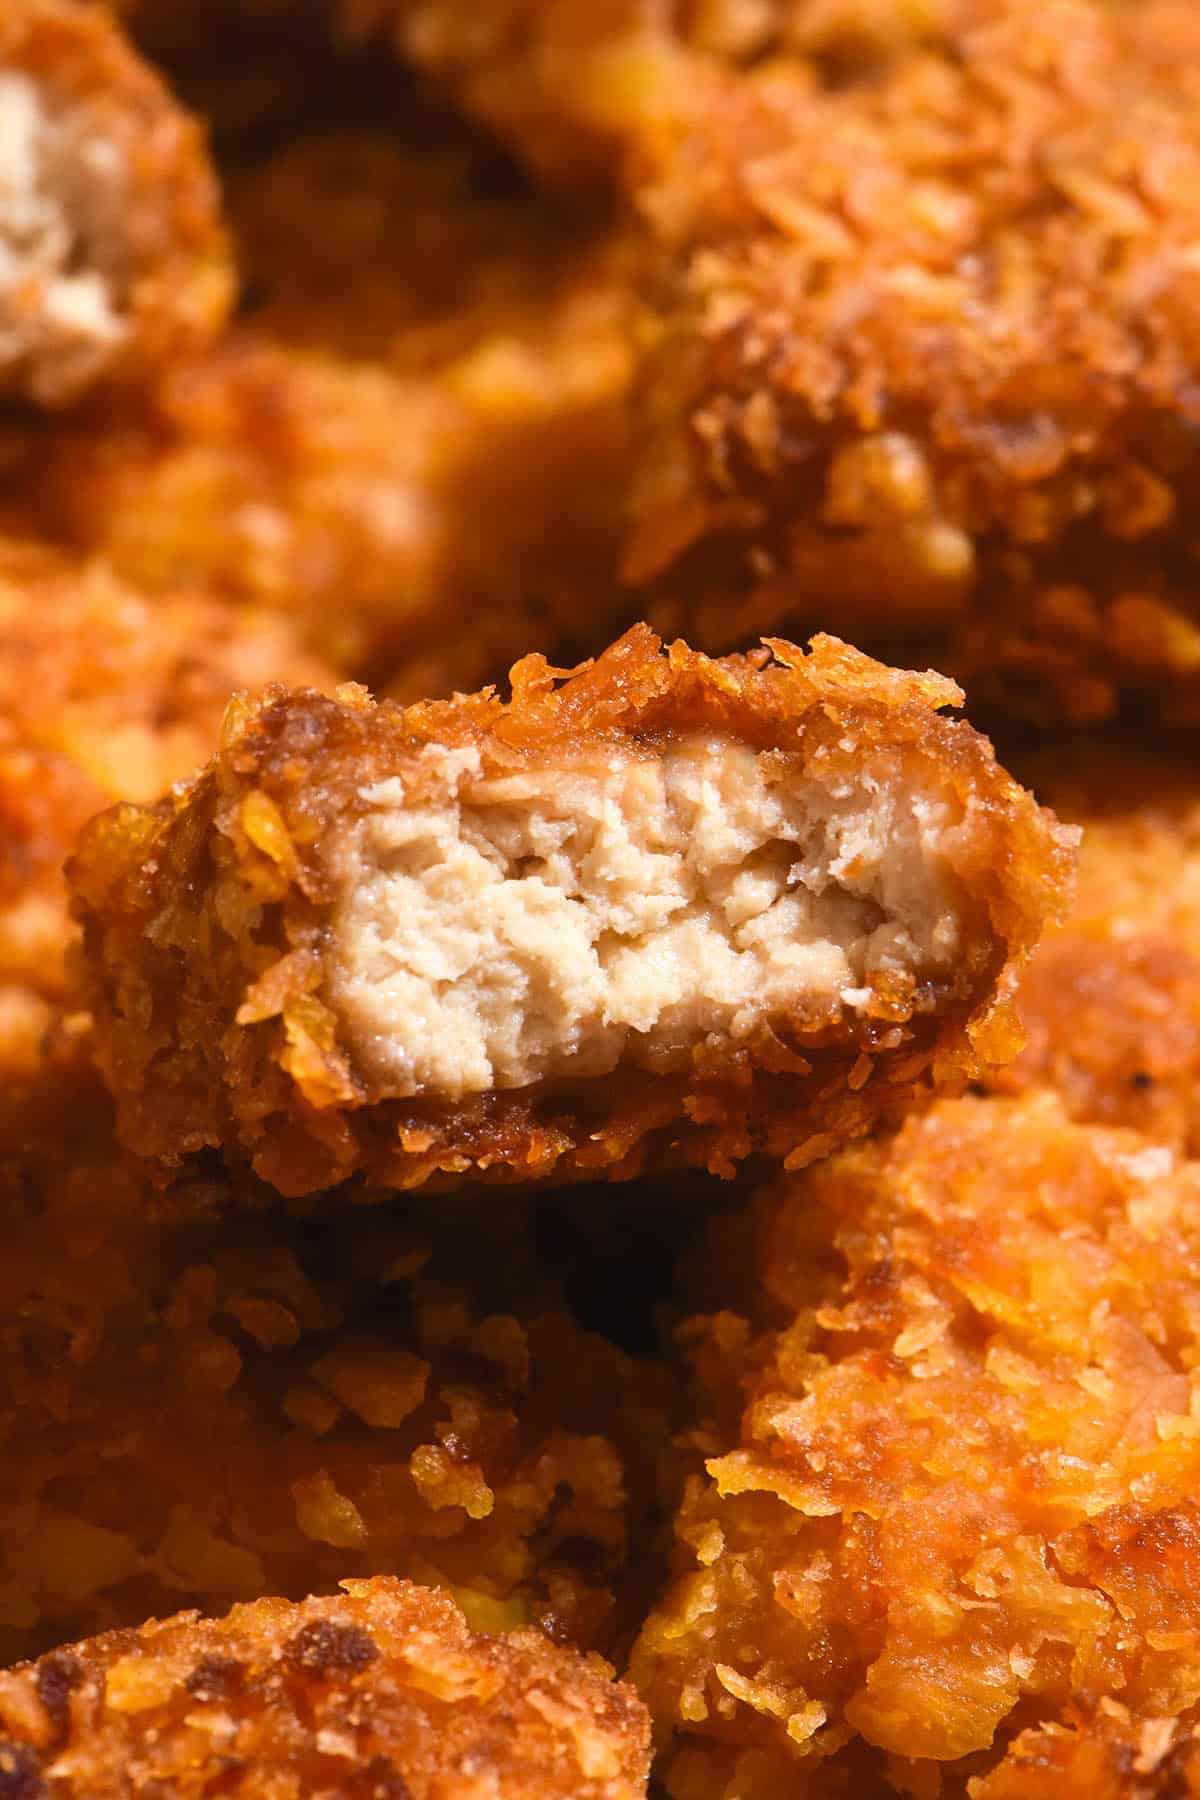 A macro close up image of gluten free tofu nuggets. The central nugget has been bitten into, revealing the juicy 'meat' centre and golden brown crumb